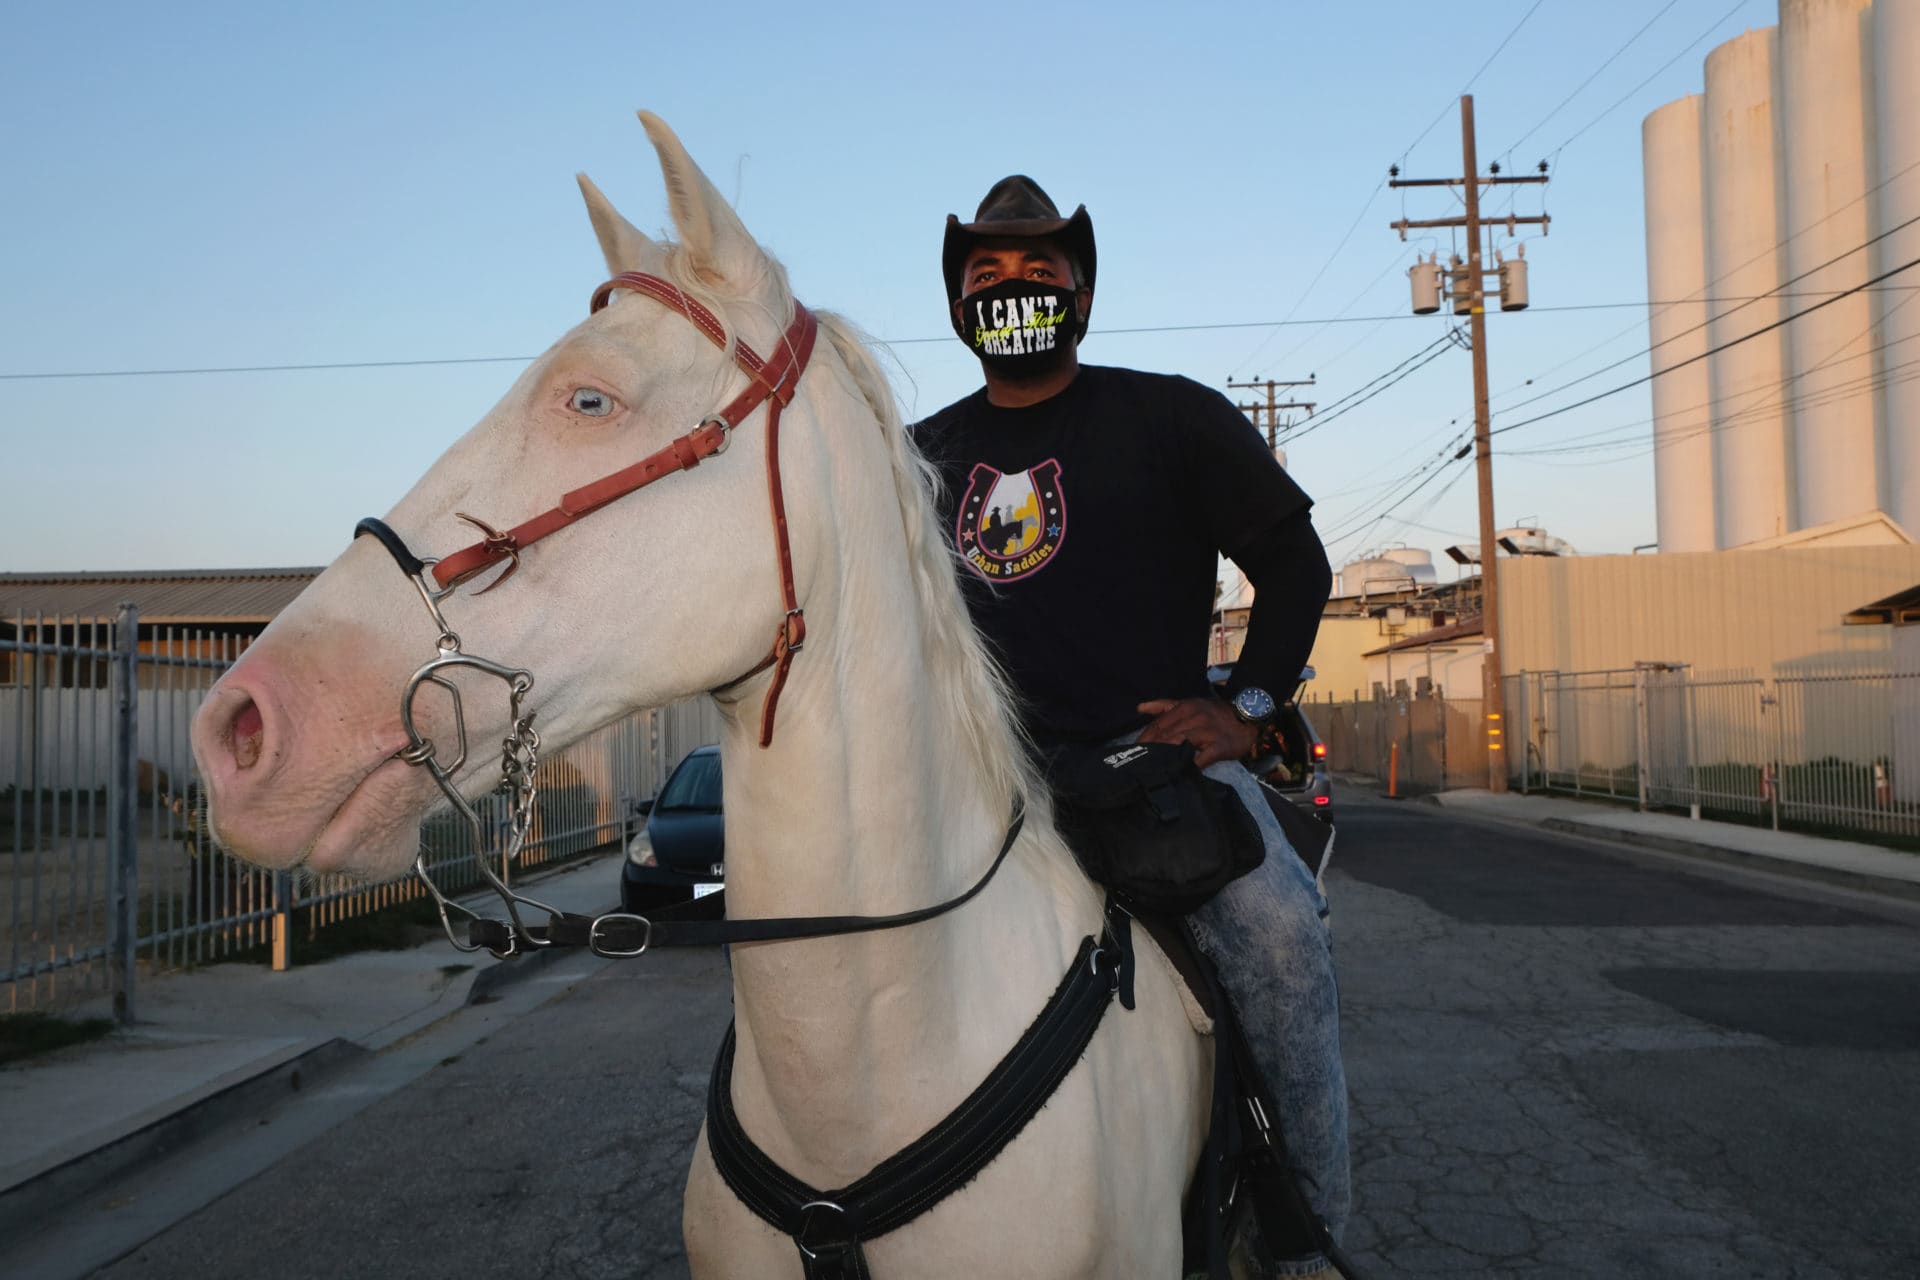 Featherstone and King head out to the Juneteenth celebration. Featherstone wears a face mask to comply with CDC guidelines. The mask is printed with George Floyd’s last words: “I can’t breathe.”